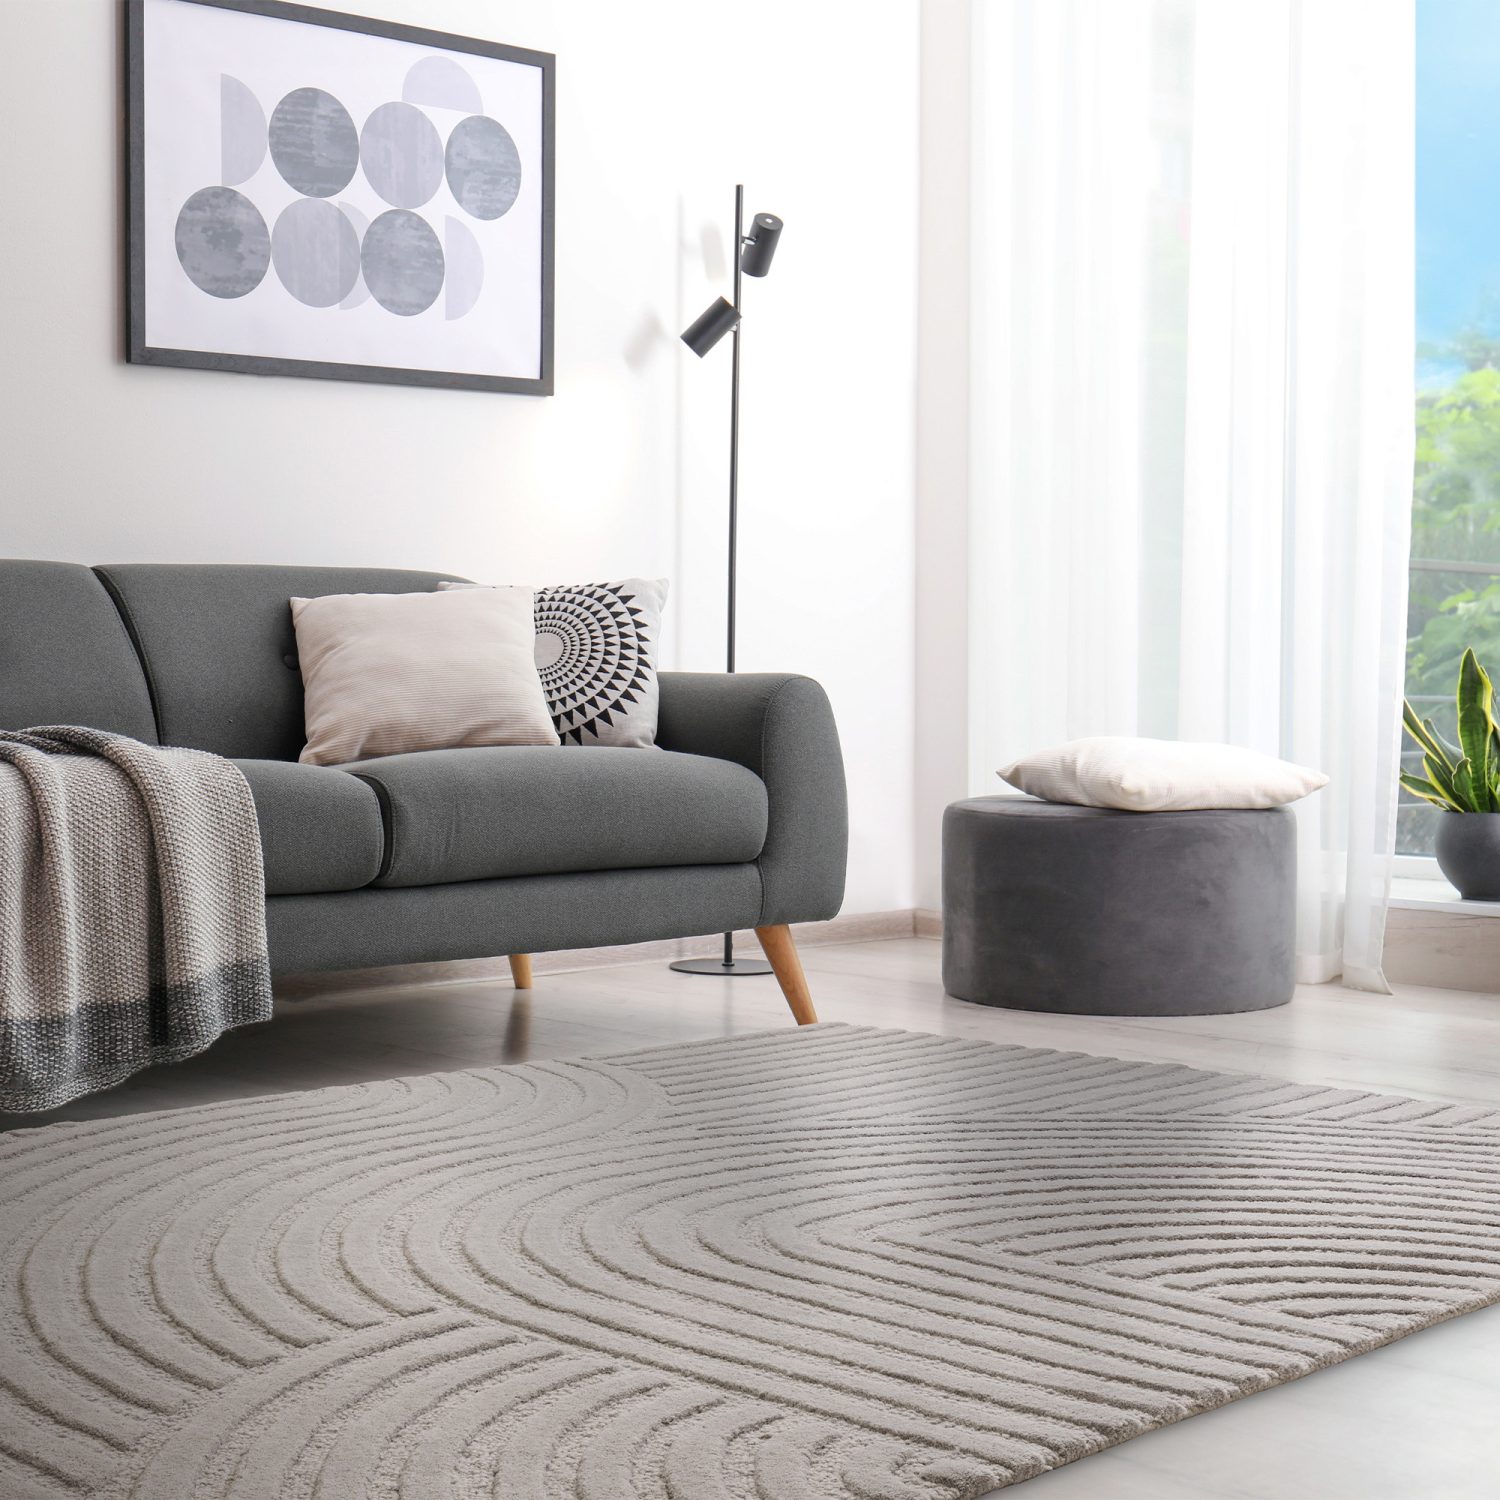 Transform your living space with our stunning silver coloured geometric rug.